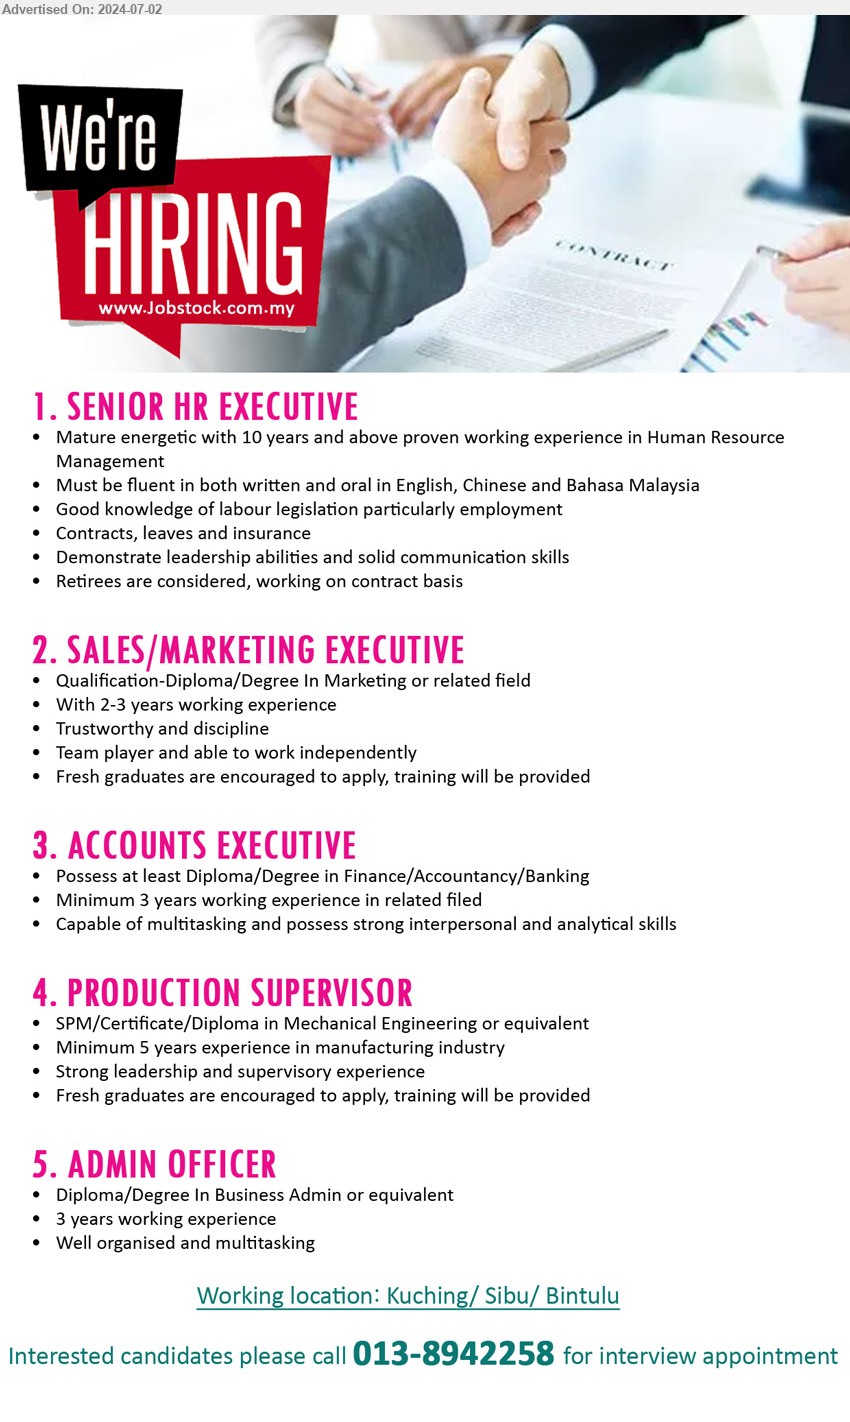 ADVERTISER - 1. SENIOR HR EXECUTIVE, 10 years exp in HR, retirees are considered, working on contract basis, ..
2. SALES/MARKETING EXECUTIVE, Diploma or above in Marketing or related, 2-3 yrs exp., fresh graduates encouraged, ..
3. ACCOUNTS EXECUTIVE, Diploma or above in Finance/Accountancy/Banking, 3 yrs exp., .. 
4. PRODUCTION SUPERVISOR, Cert. or above in Mechanical Engineering or equivalent, 5 yrs exp. in manufacturing, training provided, ..
5. ADMIN OFFICER, Diploma or above in Business Admin or equivalent, 3 yrs, ..
Working location: Kuching/ Sibu/ Bintulu
Interested candidates please call 013-8942258 for interview appointment 
